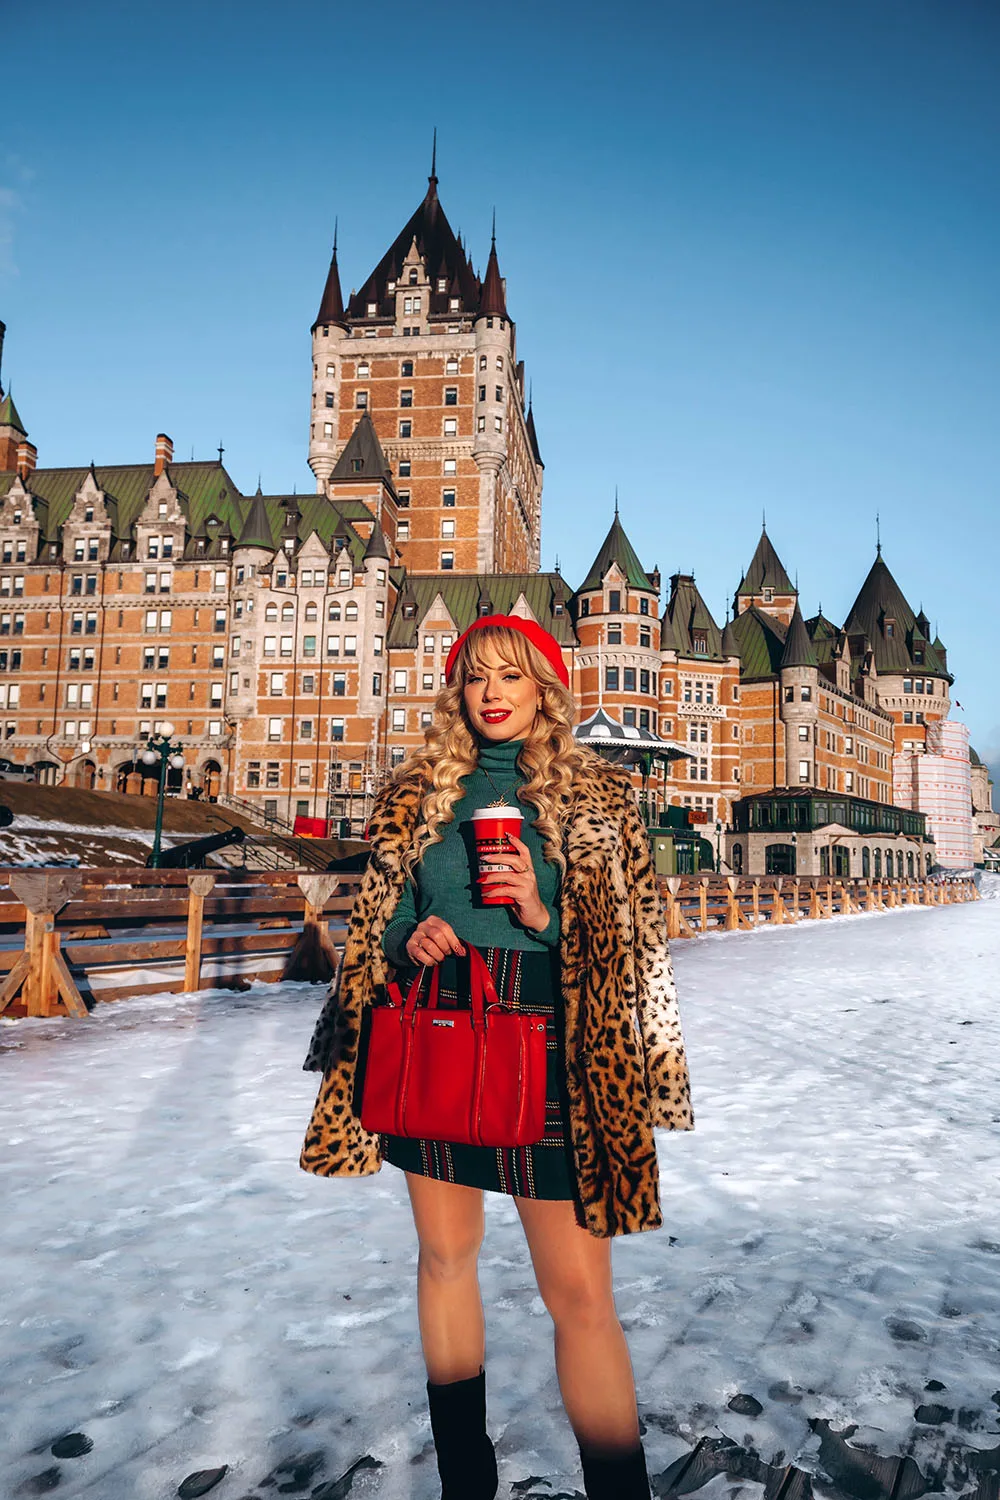 Quebec City at Christmas time is absolutely magical. In fact, it’s pretty safe to say it’s the most magical place to visit at Christmas time in all of Canada! If you’re planning a trip to Quebec City this winter you won’t want to miss this guide to the best things to do in Quebec City at Christmas time. This guide features everything from the top Quebec City activities and attractions, to the must see sights, best restaurants, festive events, and everything in between. Pictured here: Visit Dufferin Terrace